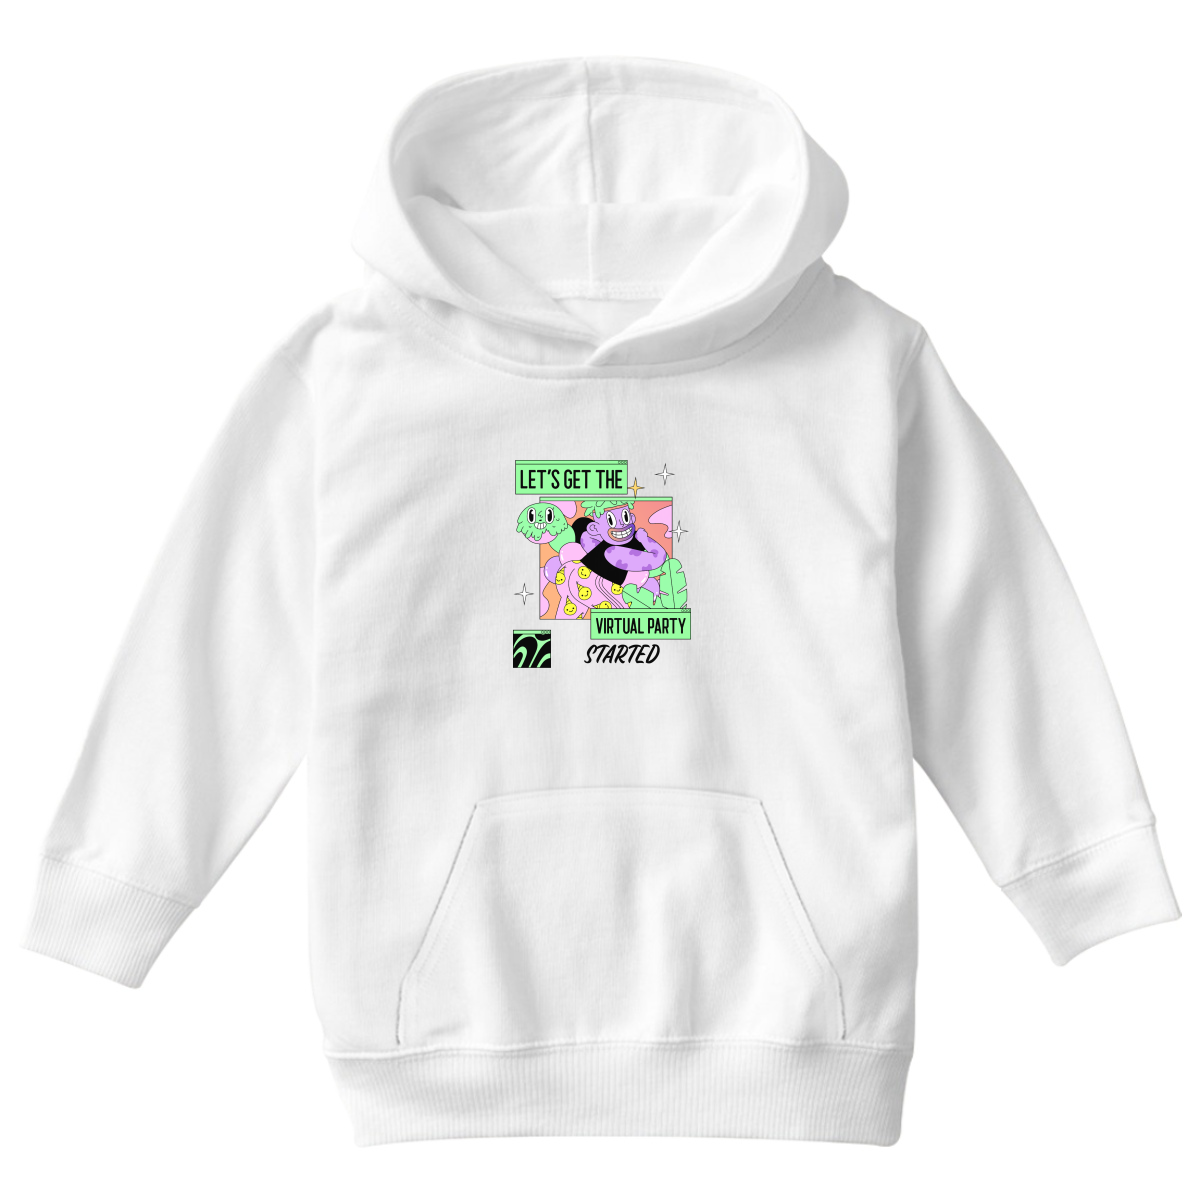 Let's get the virtual party started Kids Hoodie | White